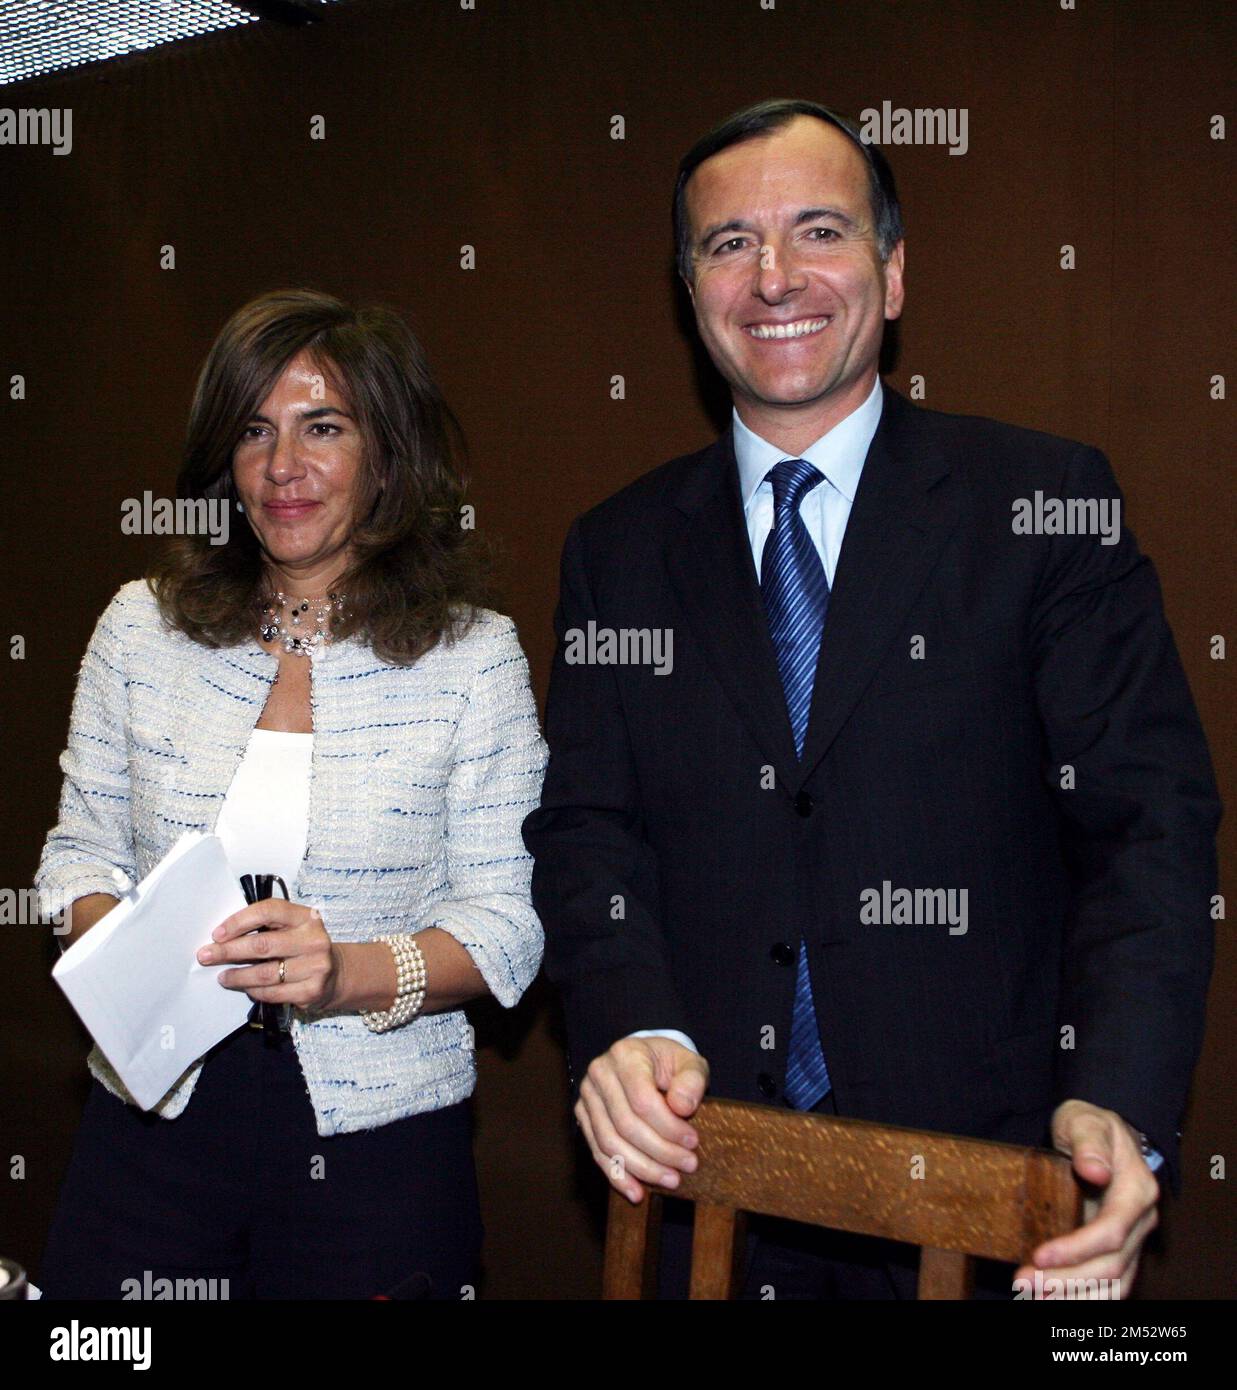 Photo Repertoire, Italy. 25th Dec, 2022. ROME CONFINDUSTRIA : CONFERENCE 'ITALIAN EXCELLENCE AT EXPO SHANGHAI 2010' IN THE PHOTO FRANCO FRATTINI FOREIGN MINISTER AND EMMA MARCEGAGLIA PRESIDENT OF CONFINDUSTRIA (ROME - 2009-04-02, Mario Maci) ps the photo can be used in respect of the context in which it was taken, and without defamatory intent of the decorum of the persons represented Editorial Usage Only Credit: Independent Photo Agency/Alamy Live News Stock Photo